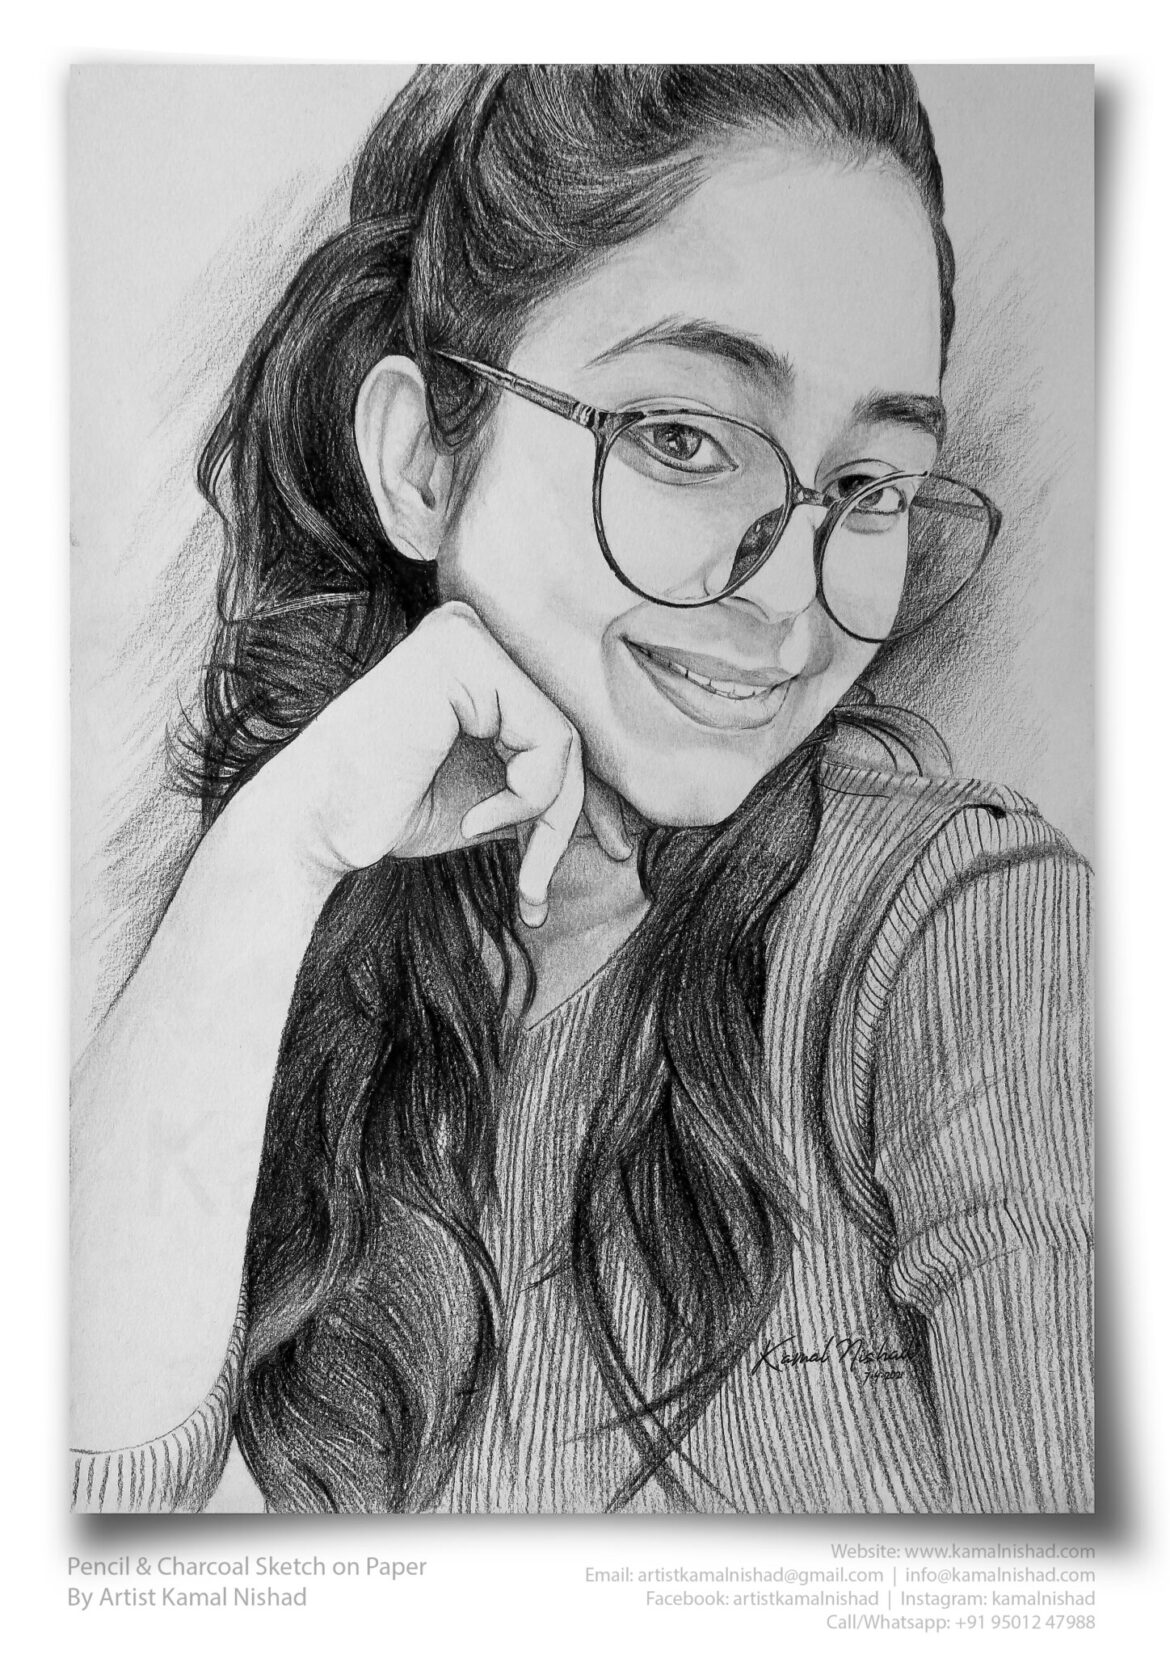 THAT SMILE | Pencil & Charcoal Sketch Title : THAT SMILE Medium : Pencil & Charcoal Sketch Size : A3 Paper size (Sketch size 29.7 x 42.0 cm*) Artist : Kamal Nishad This is a Handmade/hand-drawn Sketch made with Pencil & Charcoal “THAT SMILE”. This is a Gift from One of my Client to her friend. 💐 SIZE: Paper size A3 (work area 11.7 x 16.5 inches *estimated) Created by © Kamal Nishad. All rights reserved.